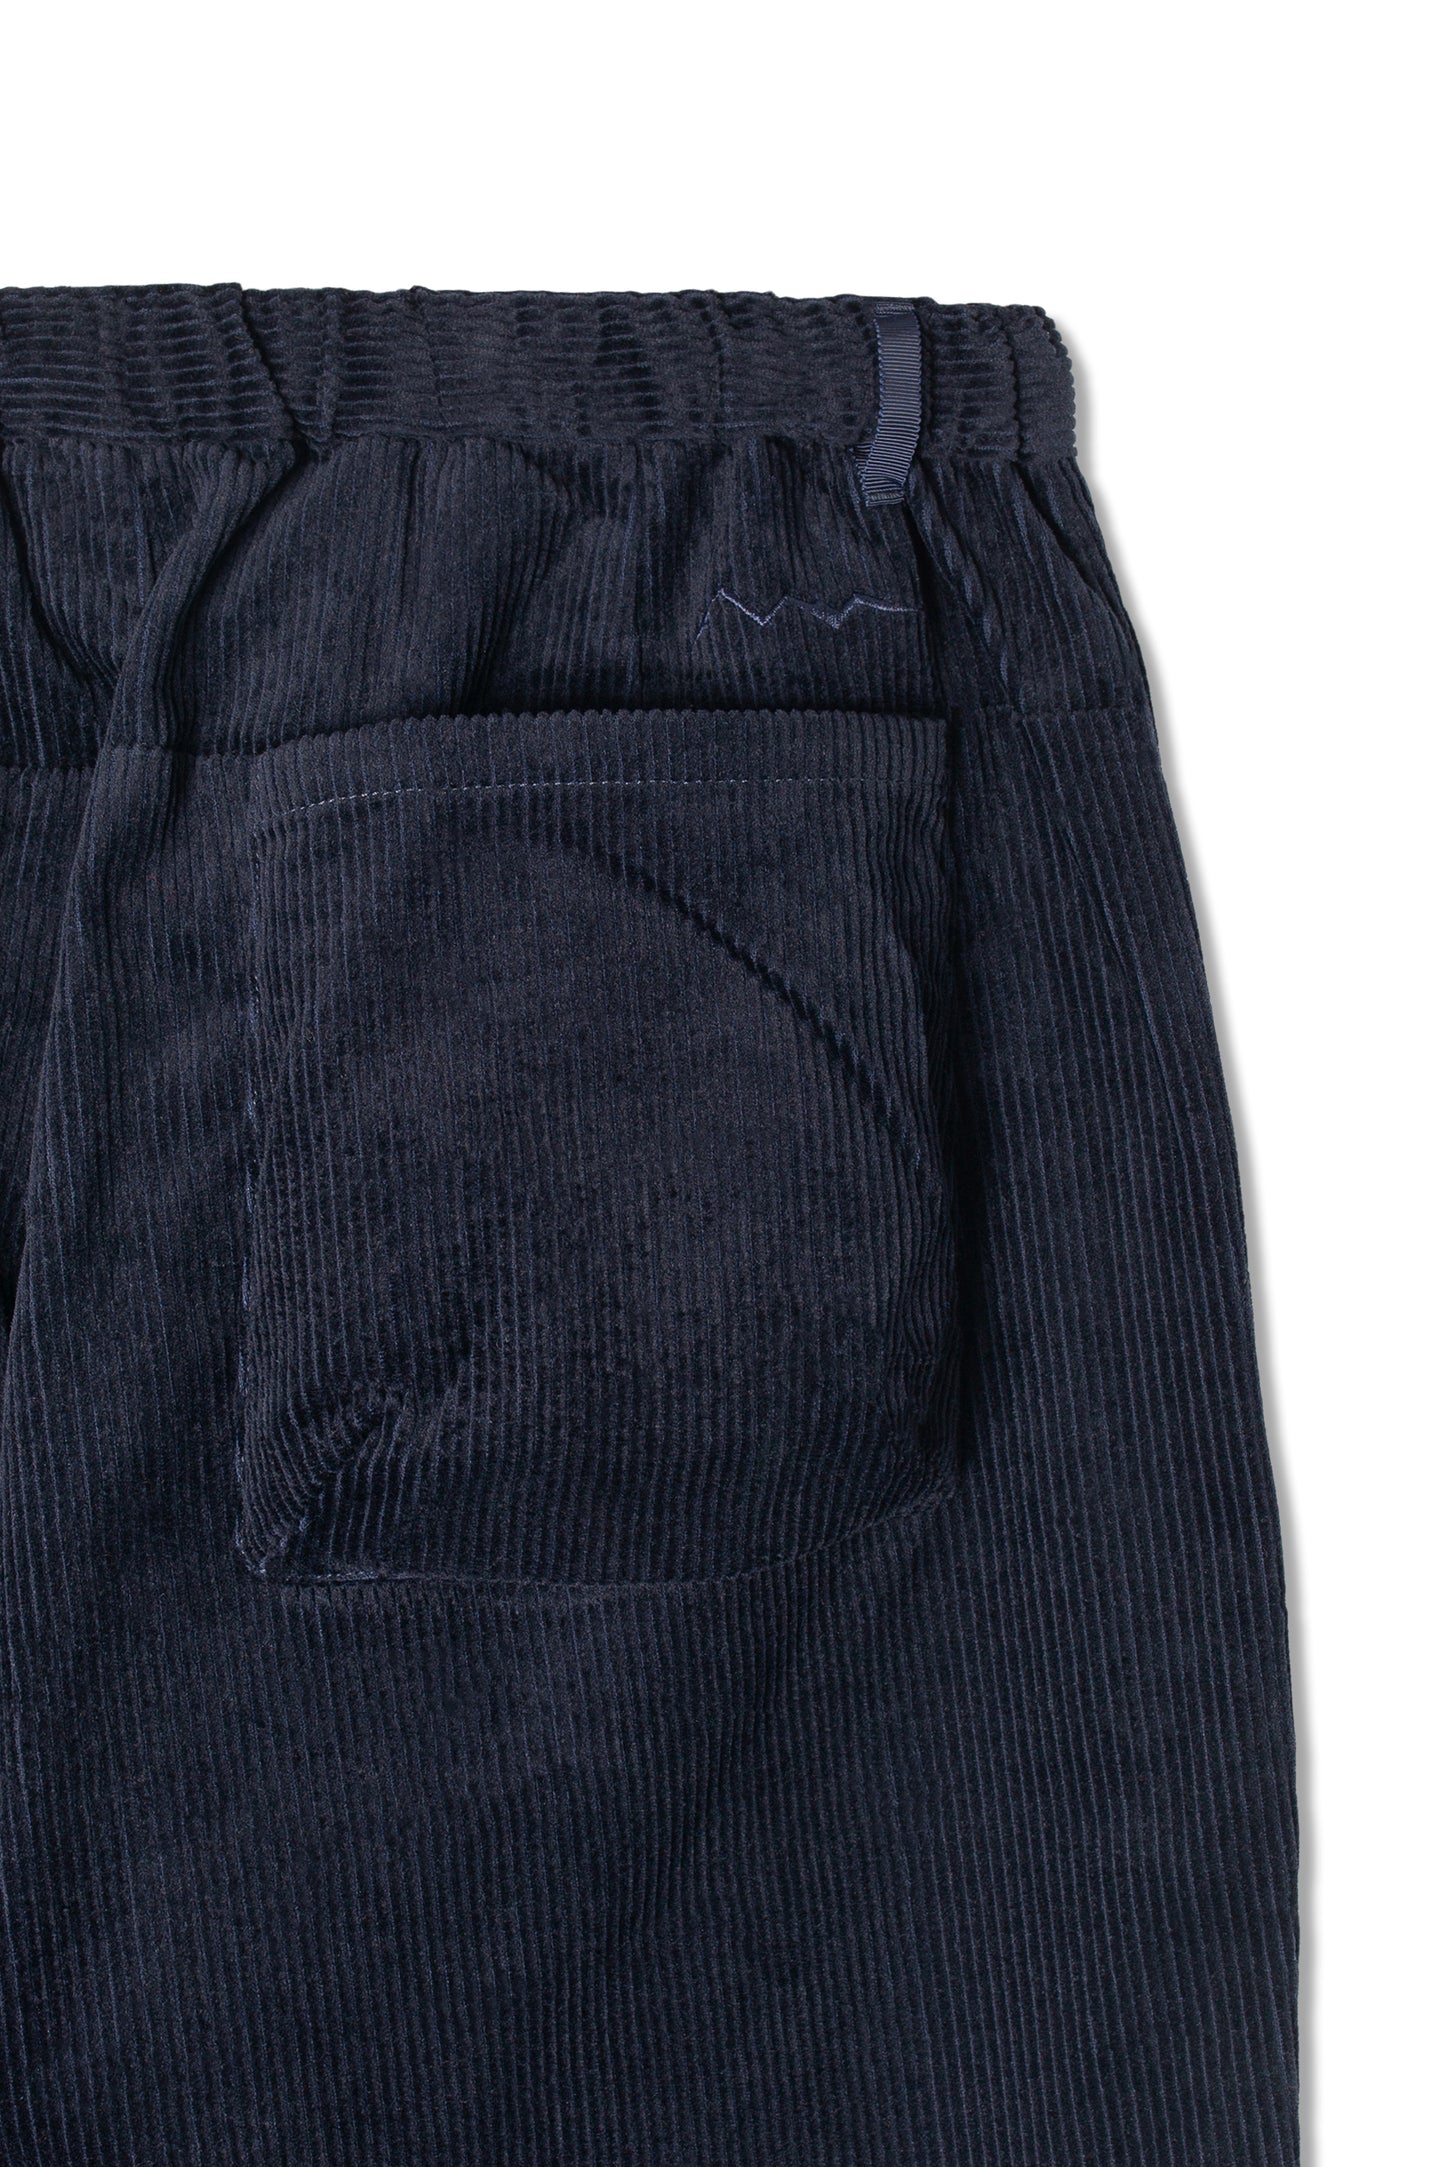 8W Cocoon Pant 23 (Navy)